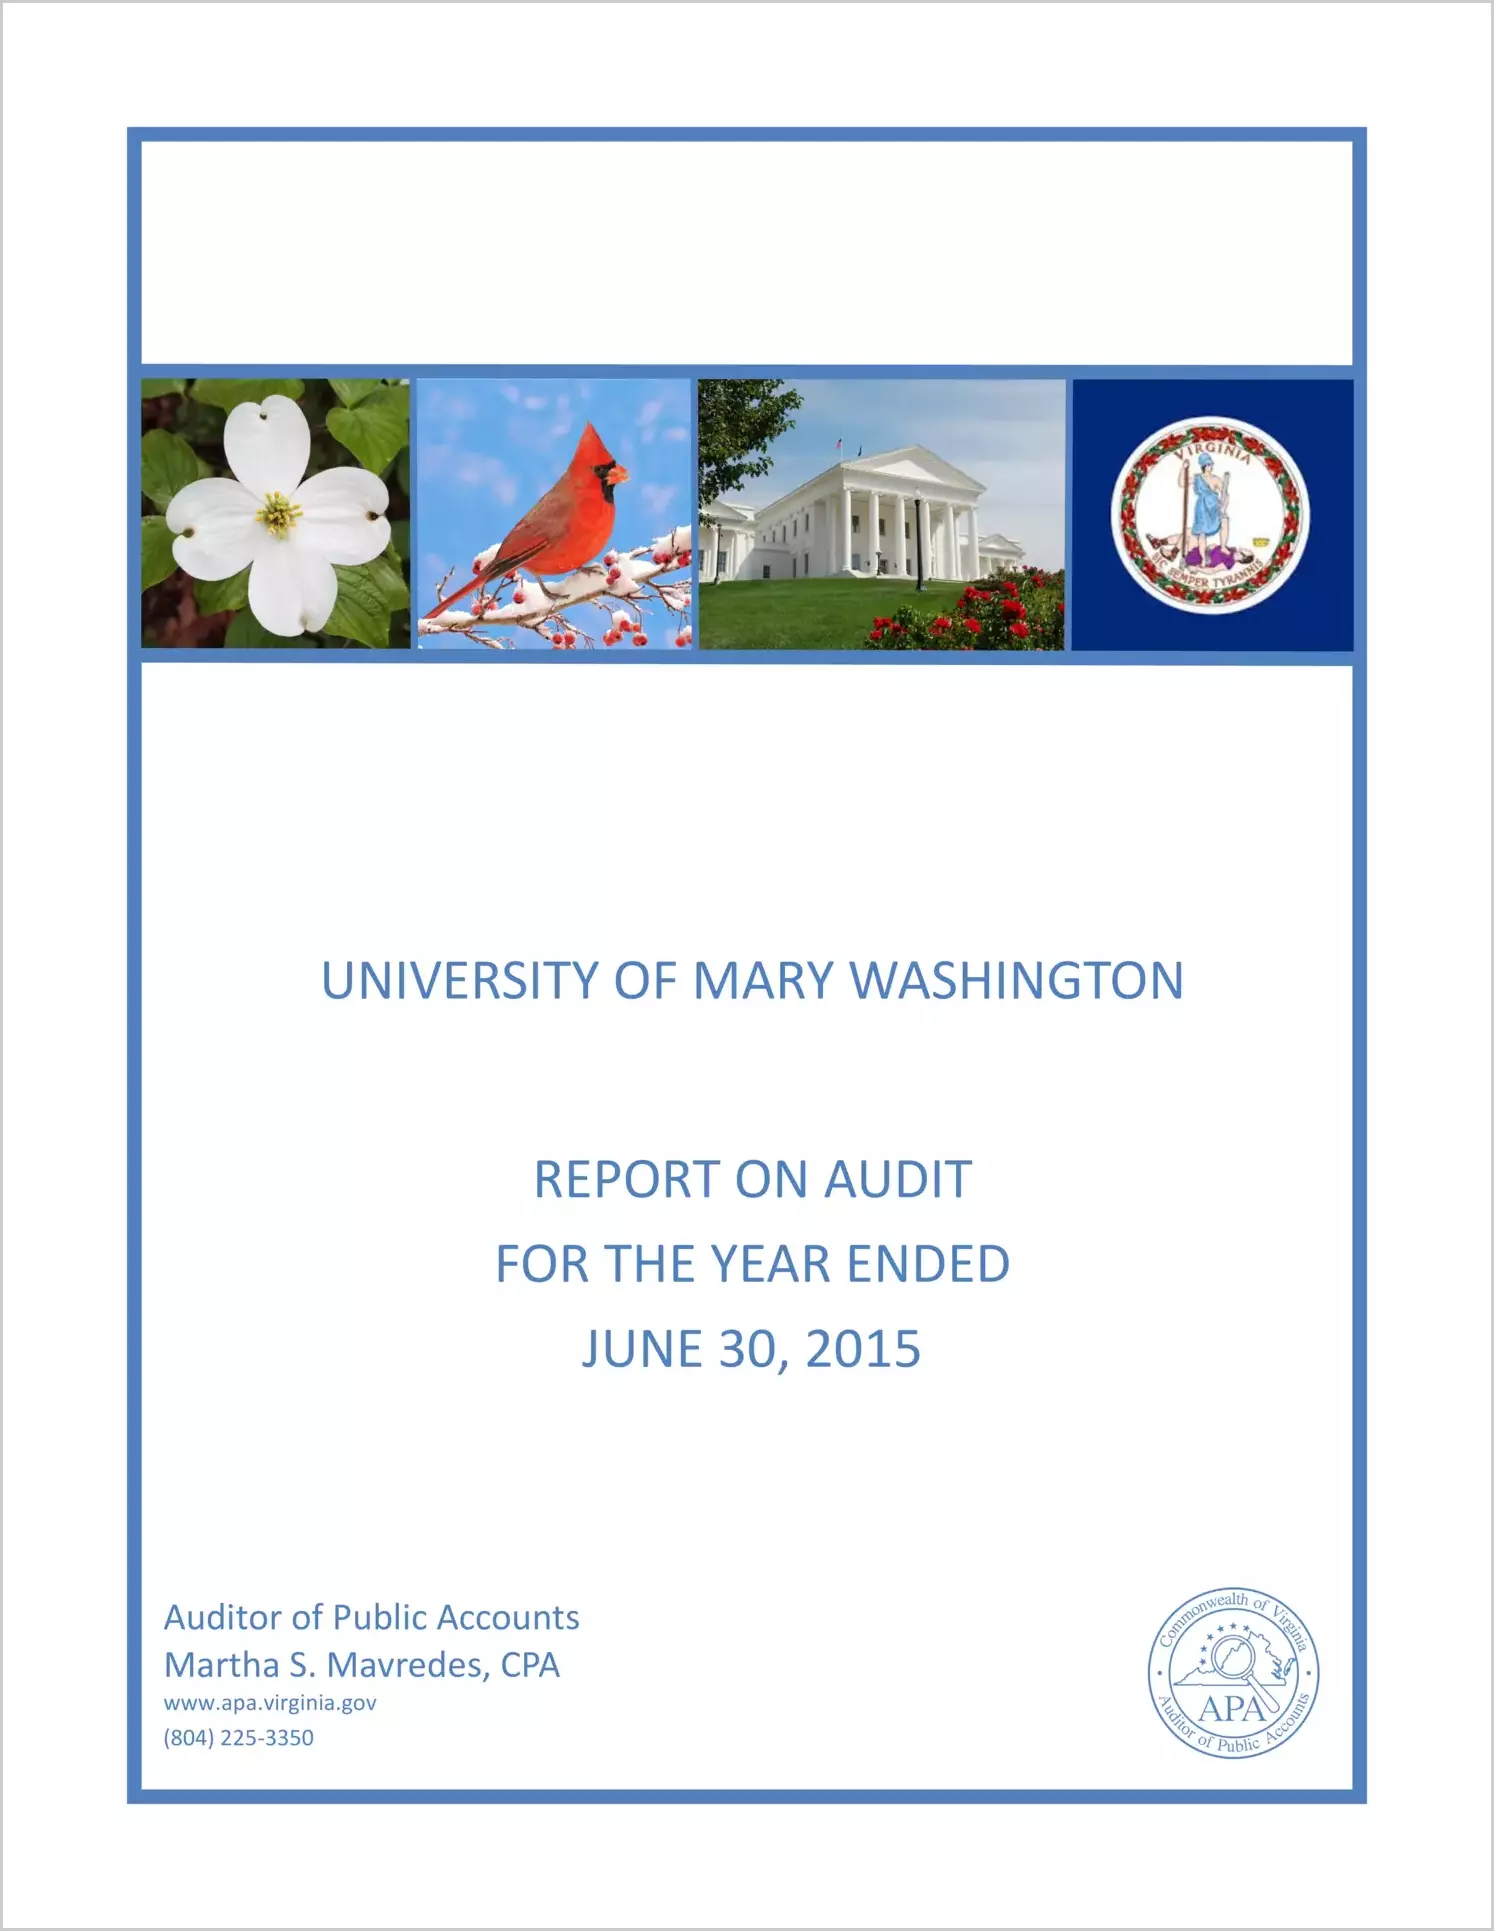 University of Mary Washington for the year ended June 30, 2015